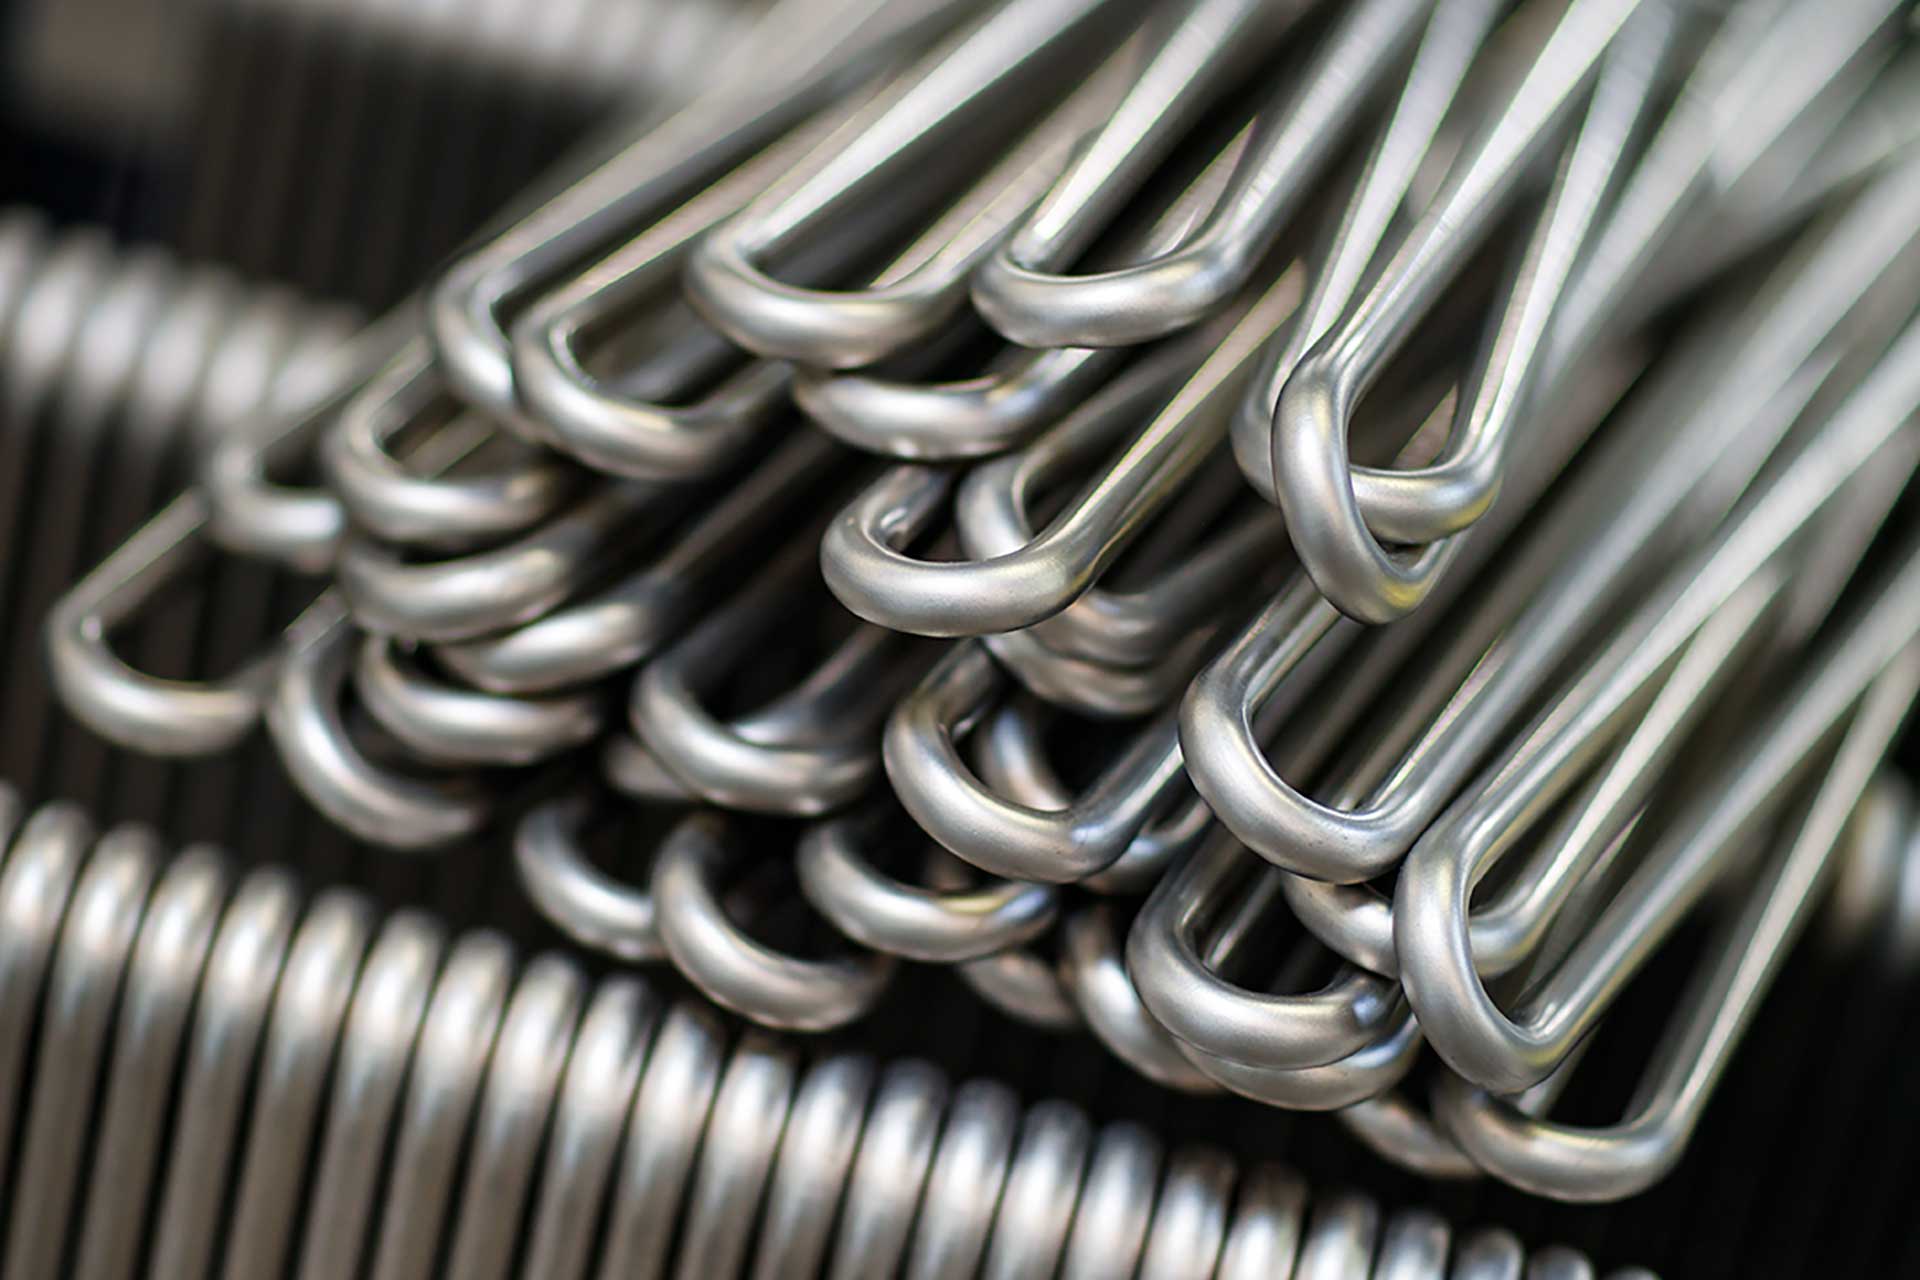 A close up picture of heating elements